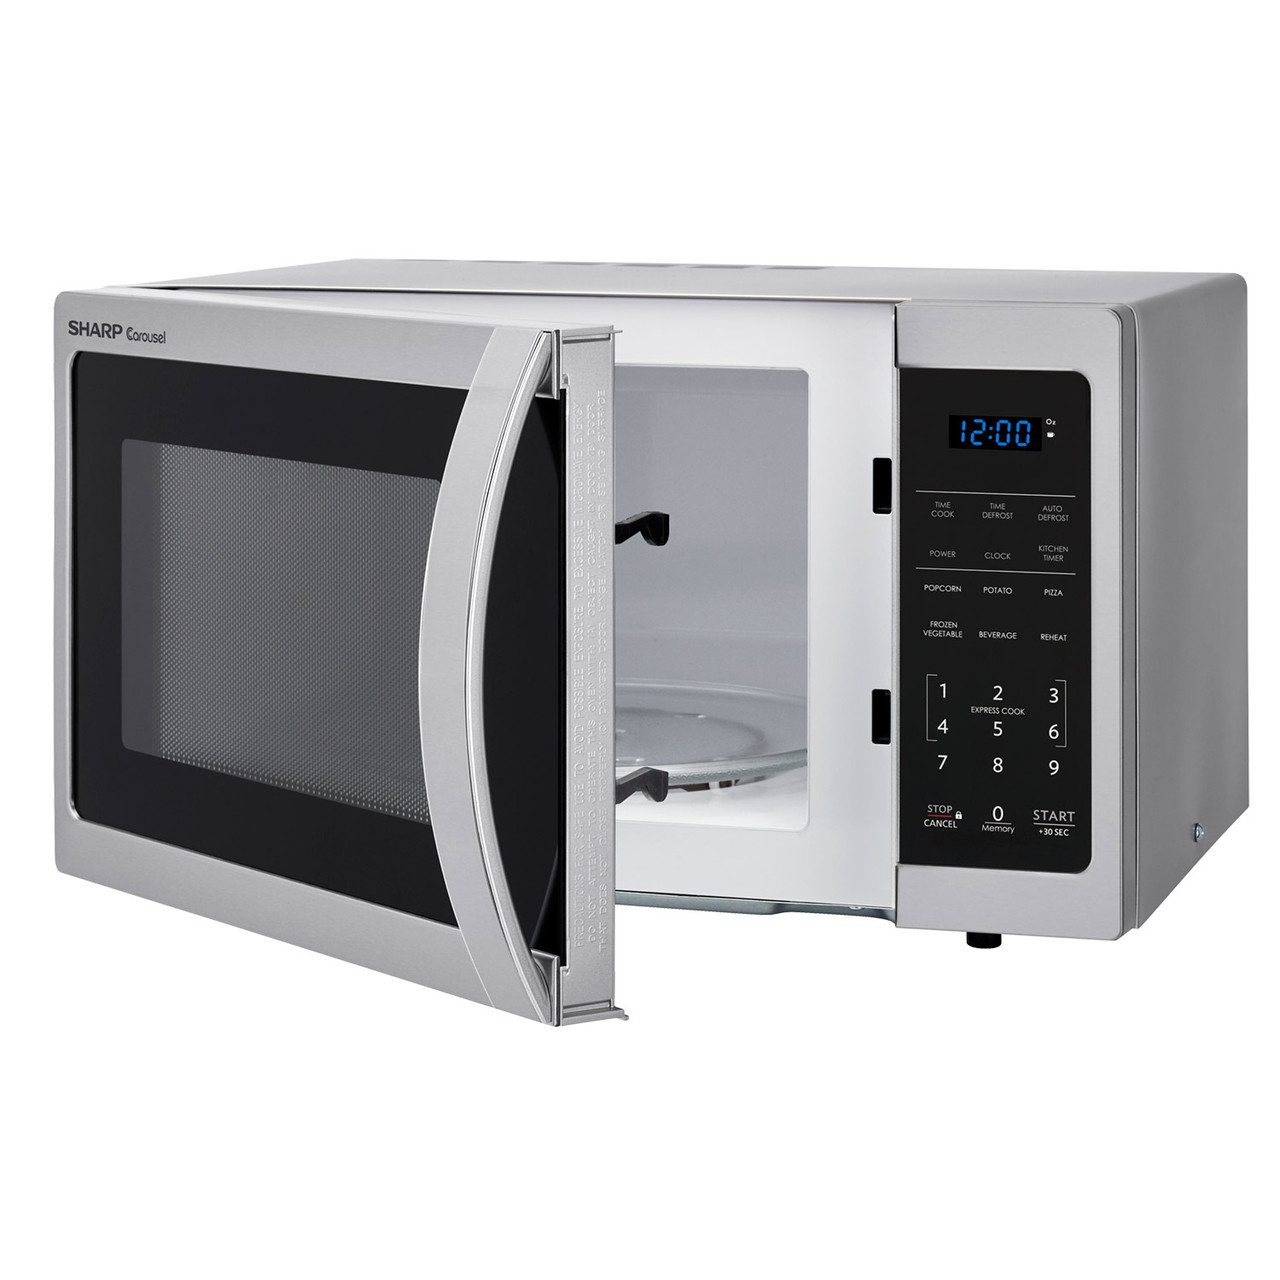 0.9 cu. ft. 900W Sharp Stainless Steel Carousel Countertop Microwave (SMC0912BS) – left angle view with door open